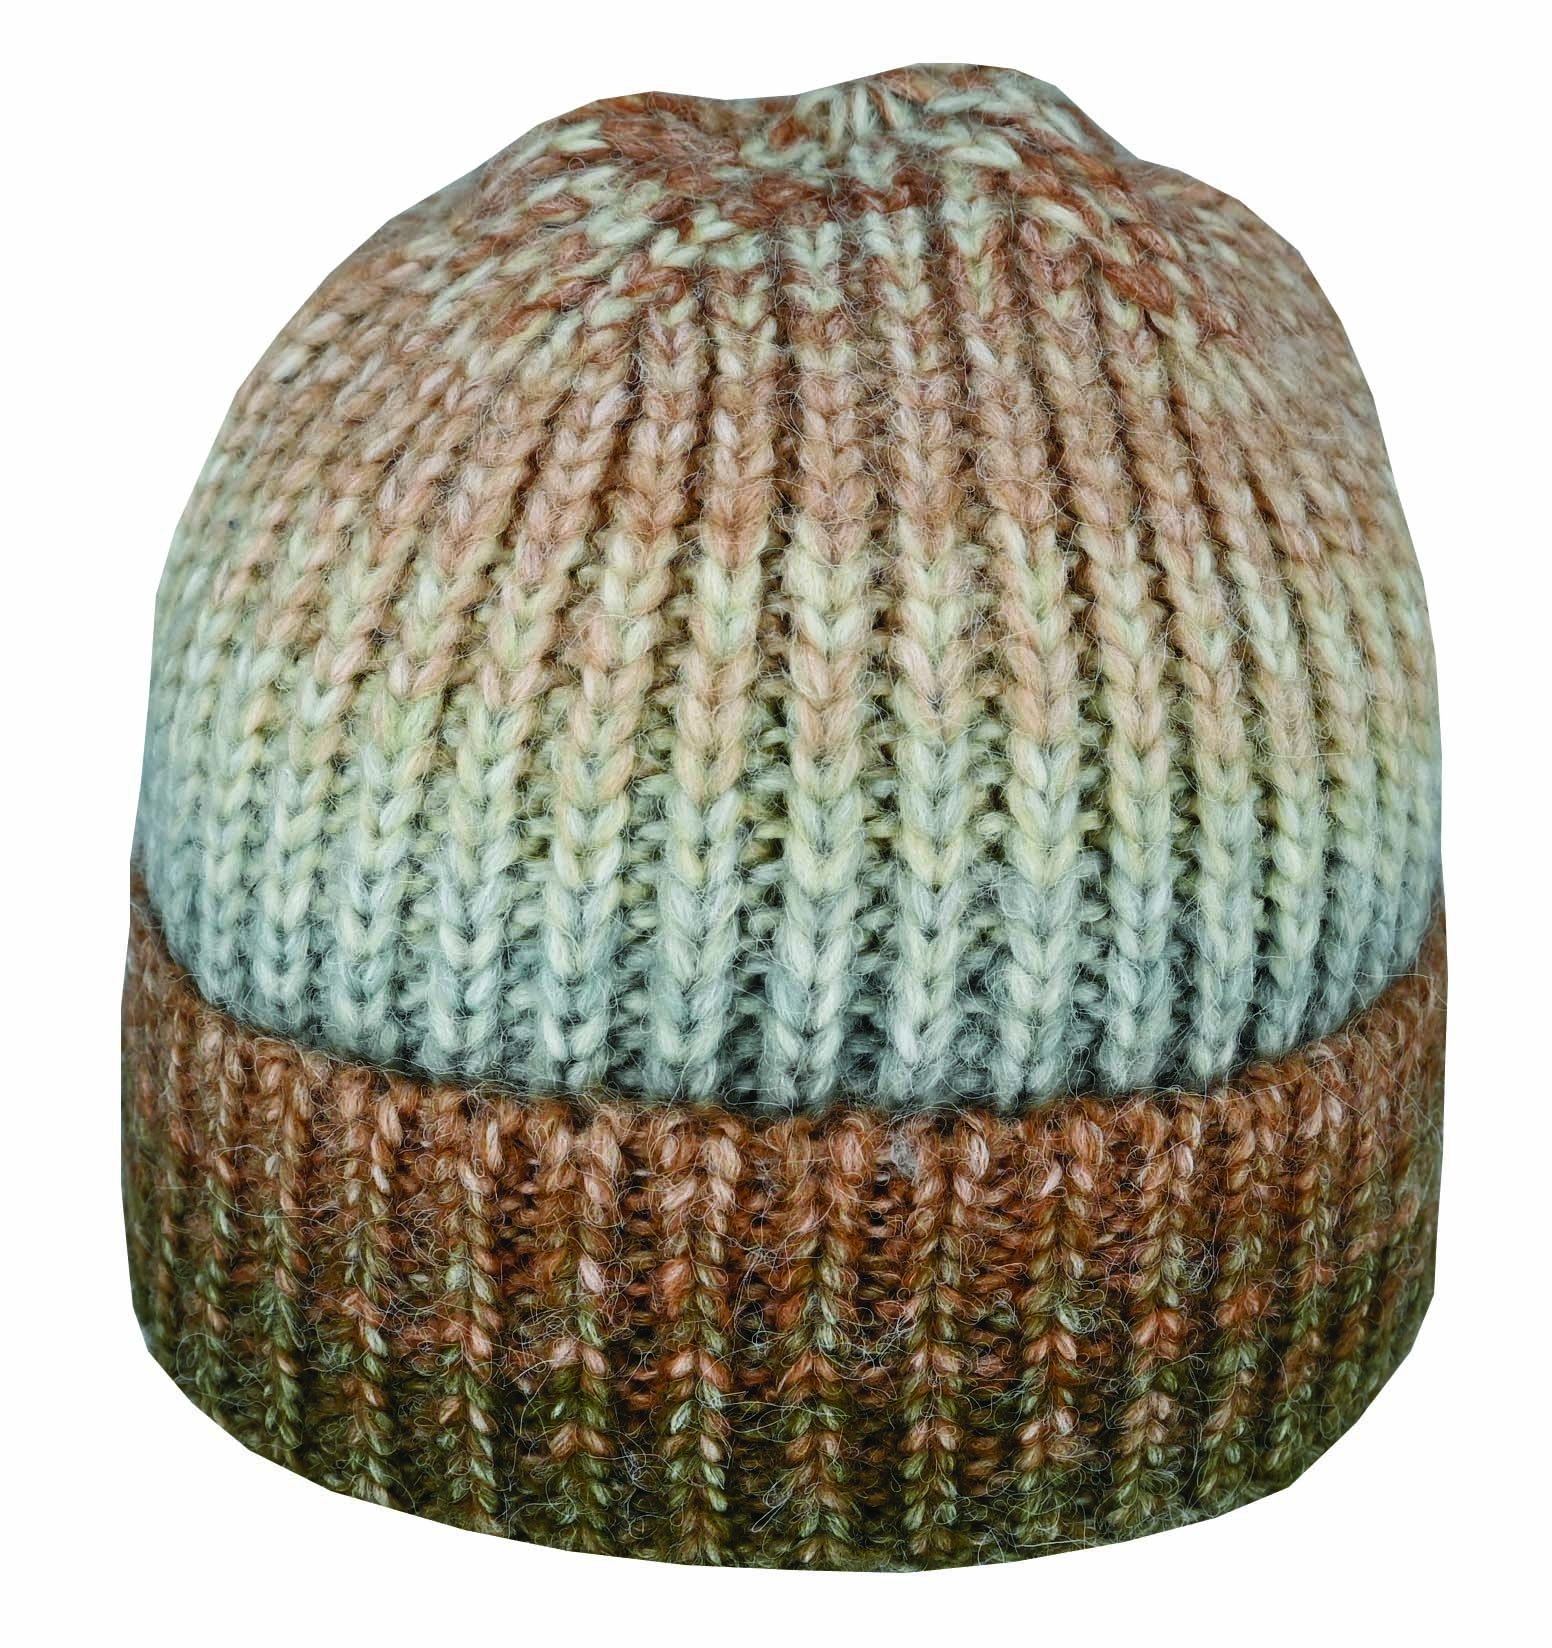 OMBRE KNIT ACRYLIC BLEND CUFFED BEANIE - PACK 12